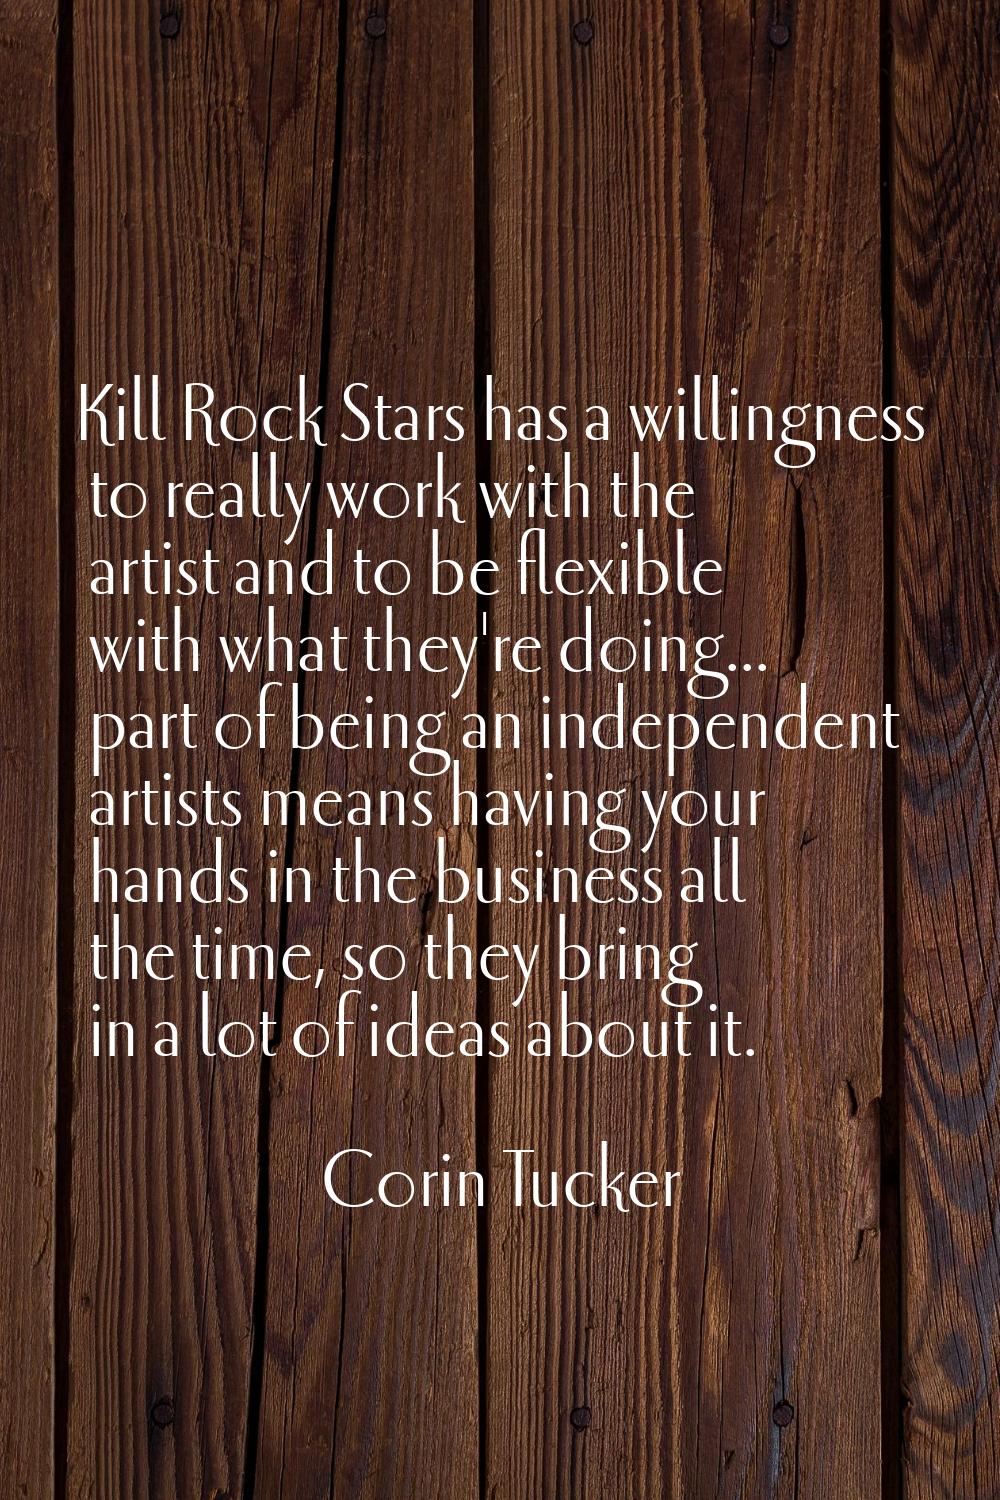 Kill Rock Stars has a willingness to really work with the artist and to be flexible with what they'